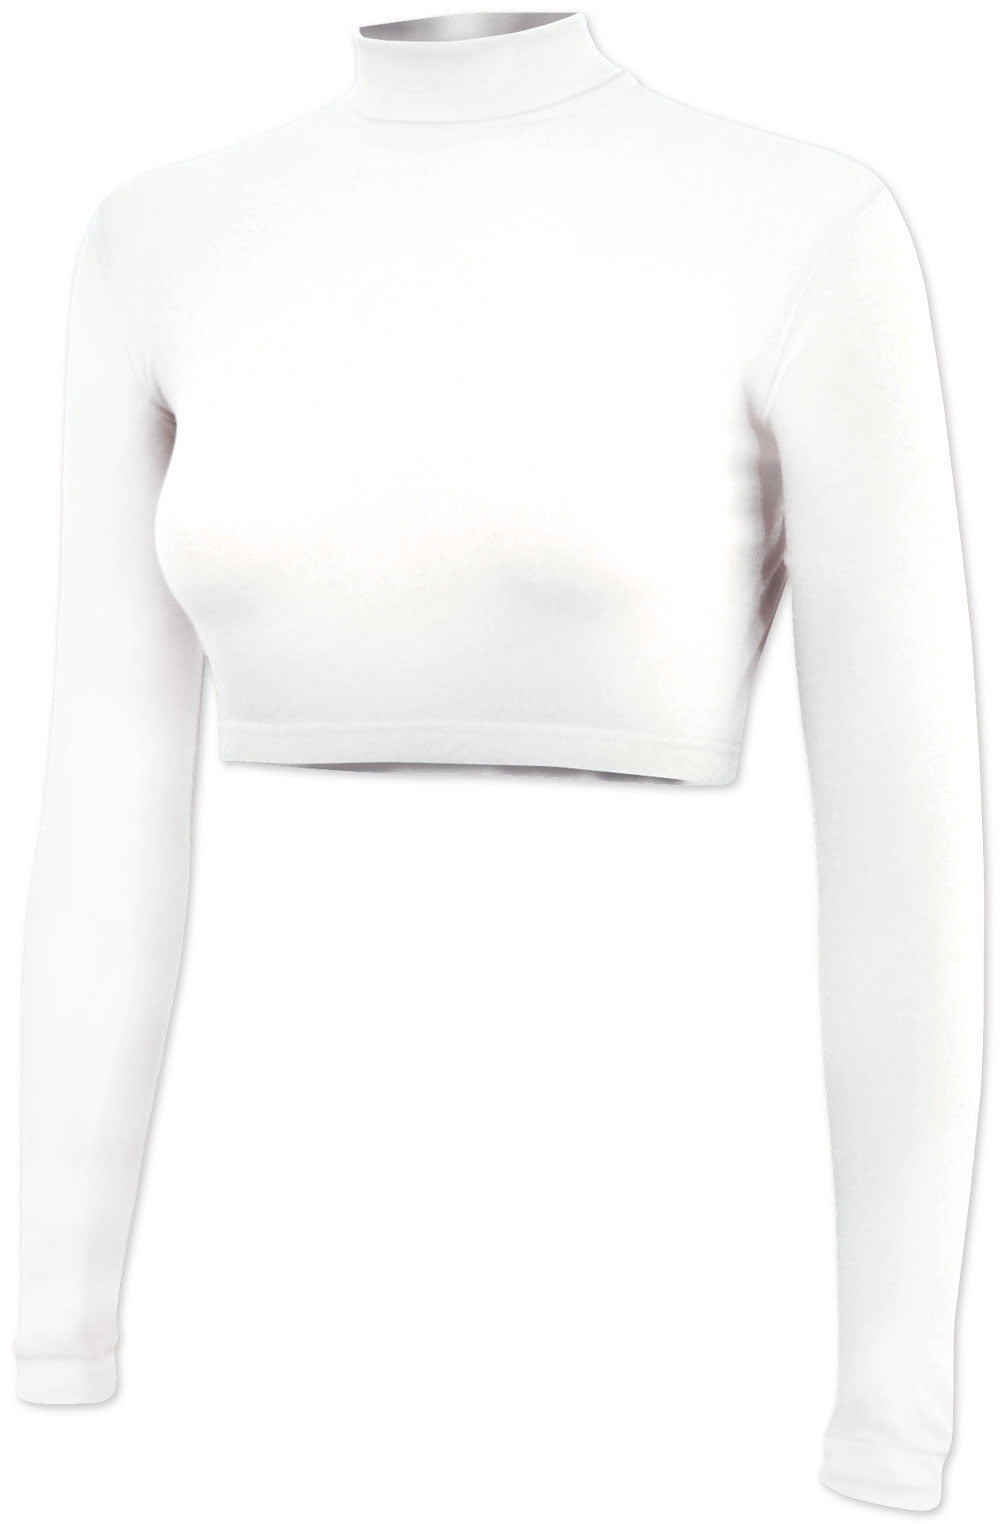 20 Pieces to Add to your 2019 Wardrobe  White turtleneck outfit, Body suit  outfits, White bodysuit outfit